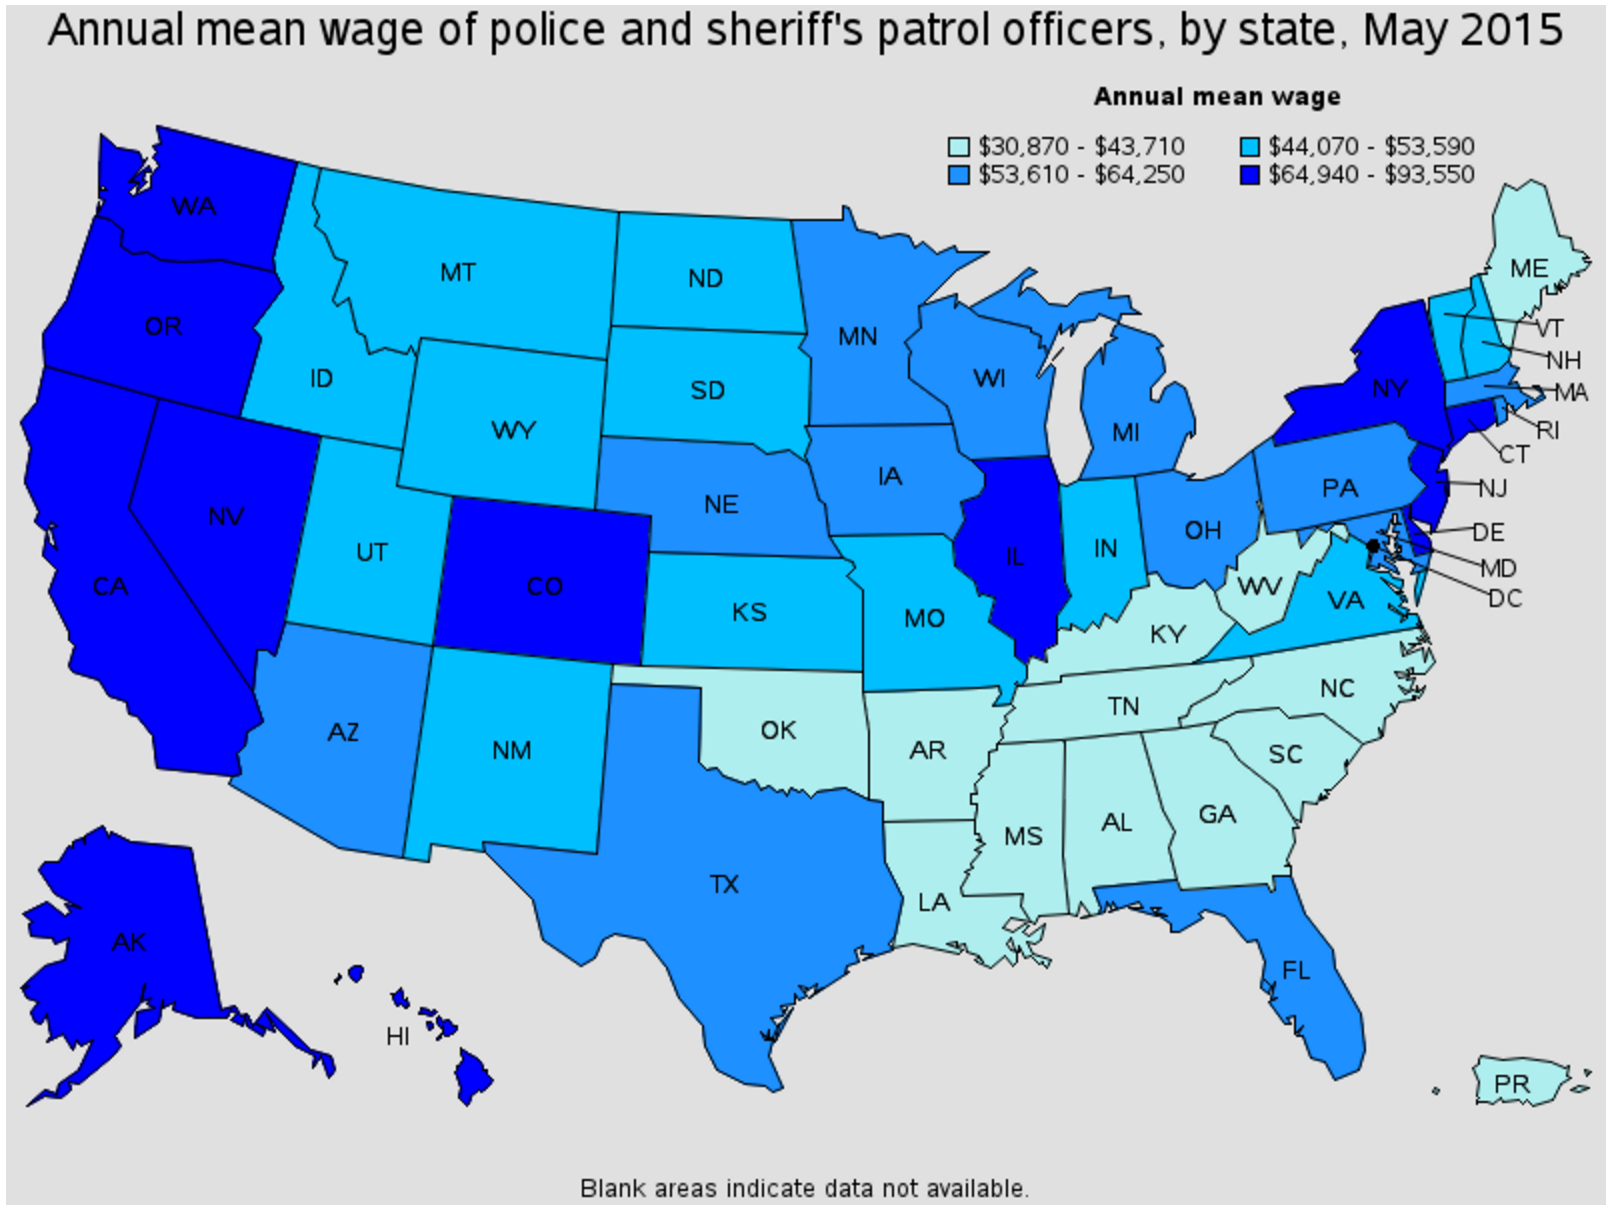 White Plains police officer average salary by state